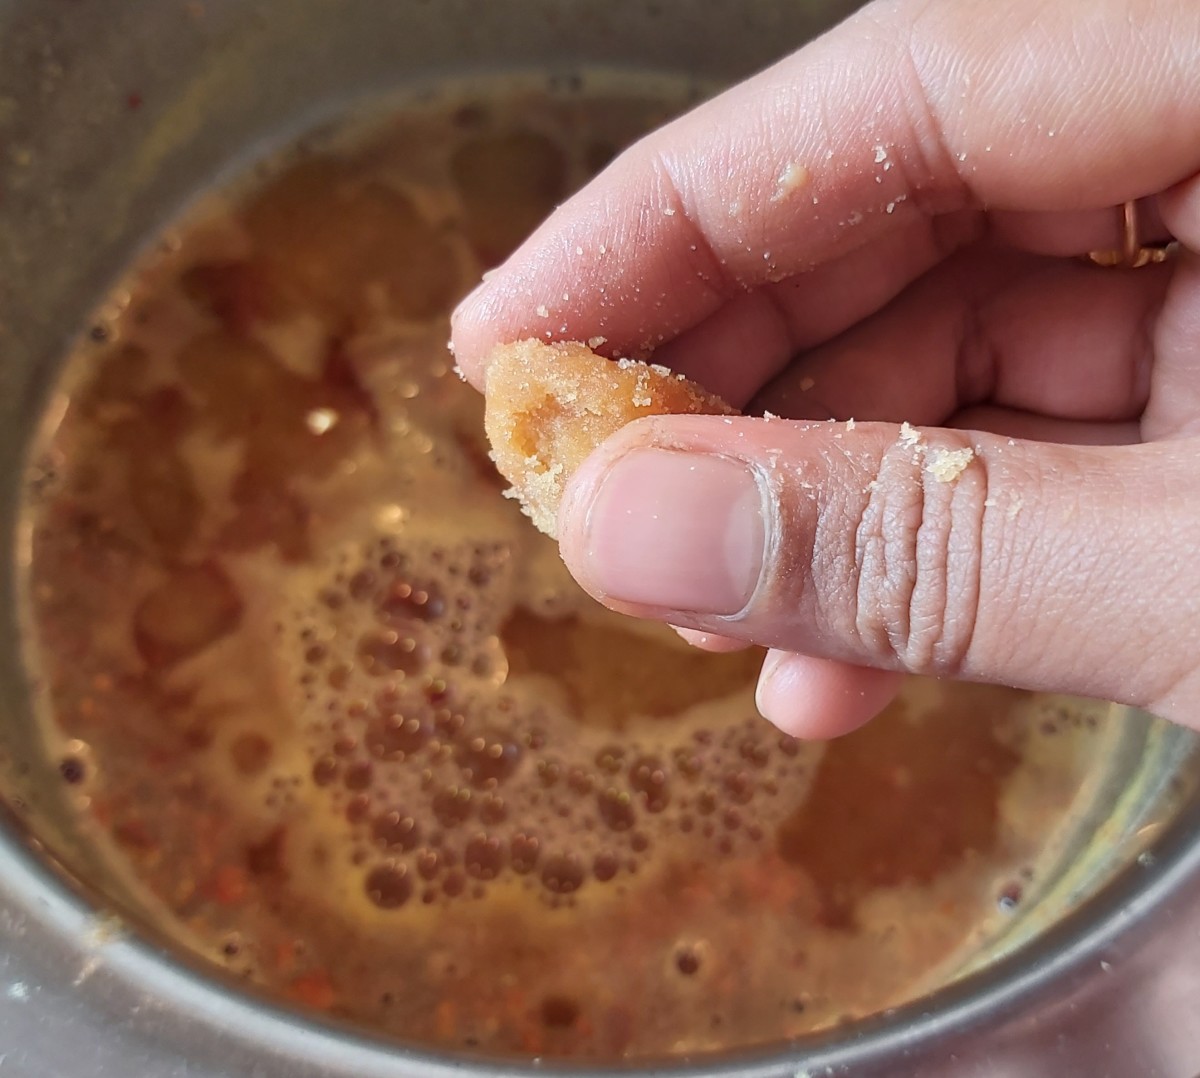 Add about 1 teaspoon of jaggery (or more to taste). The jaggery balances the sourness of the tamarind.